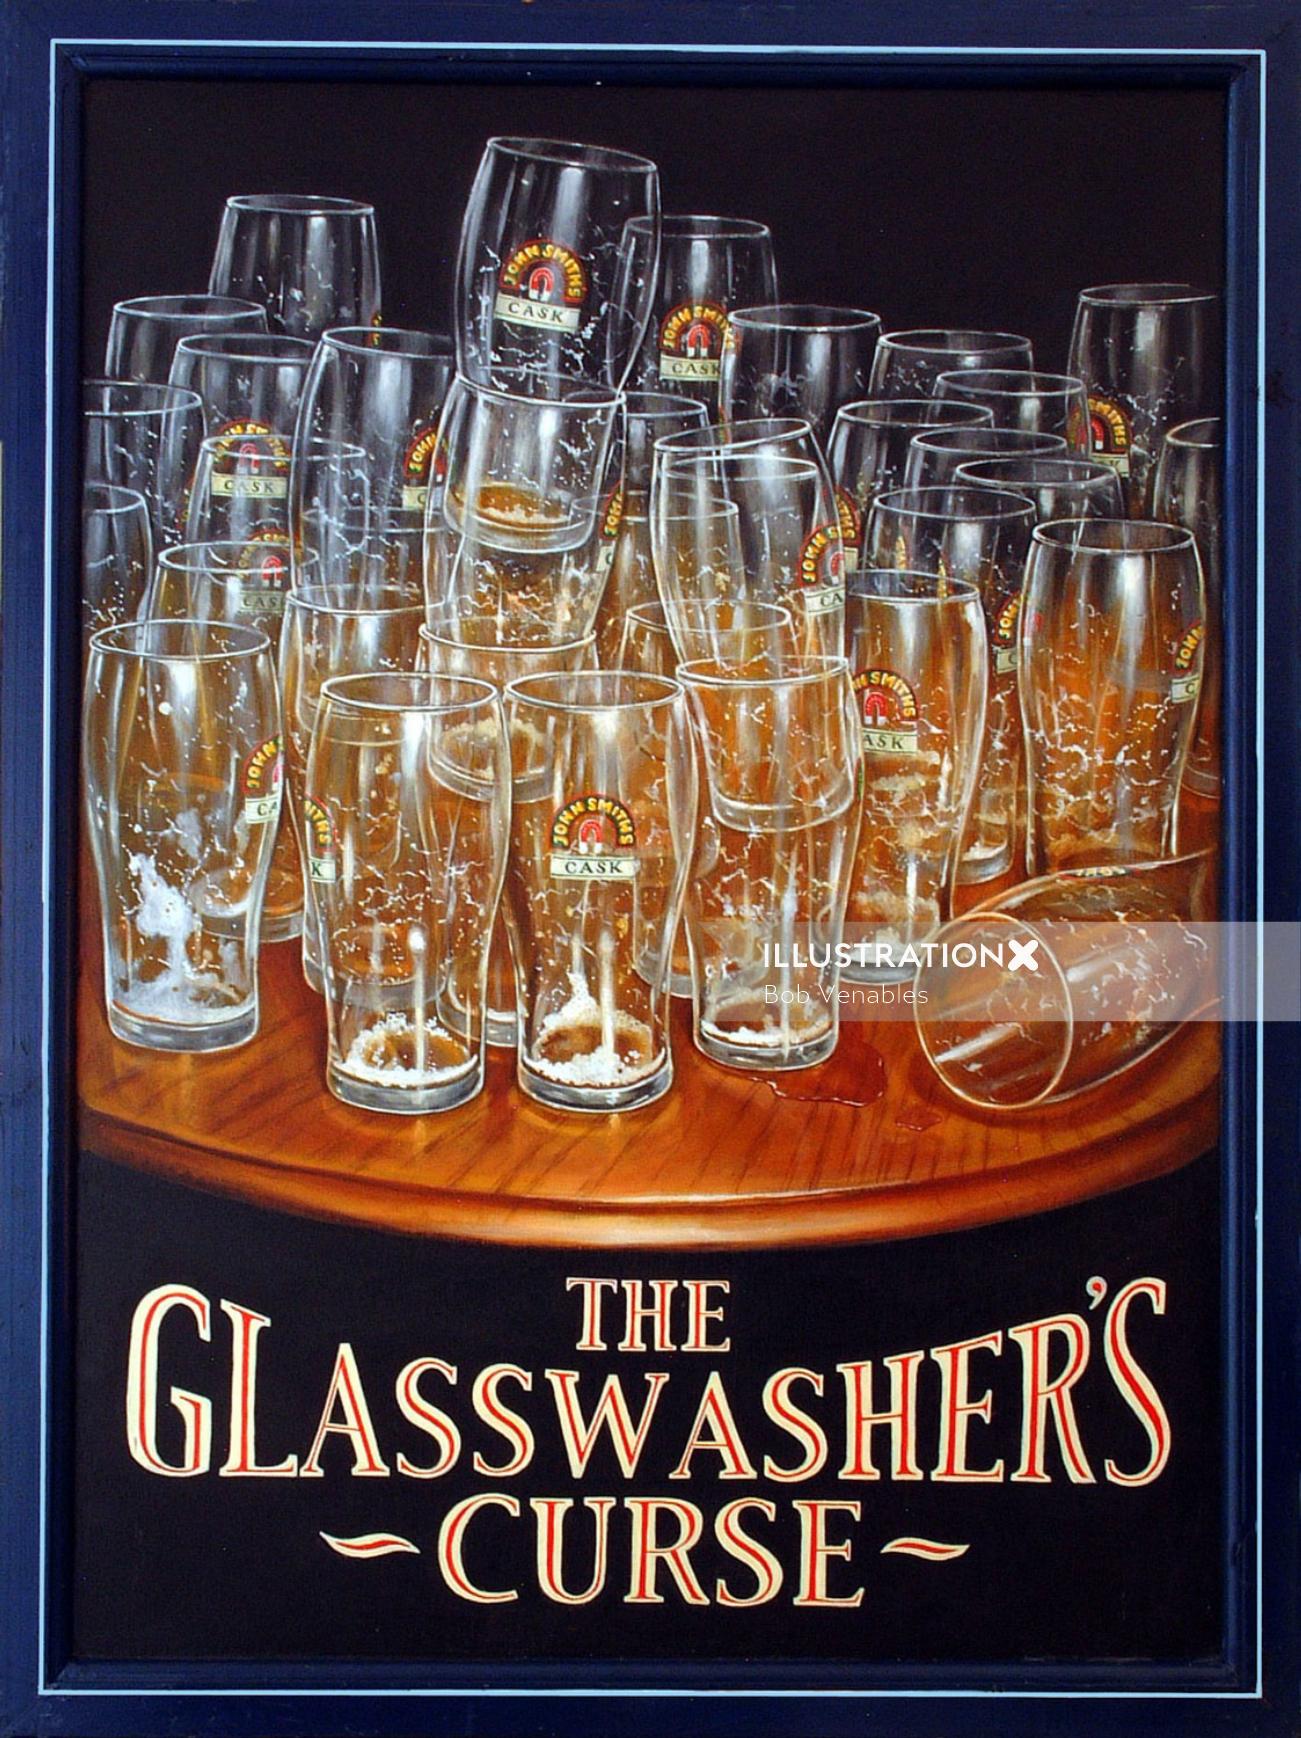 The Glasswasher's Curse poster art